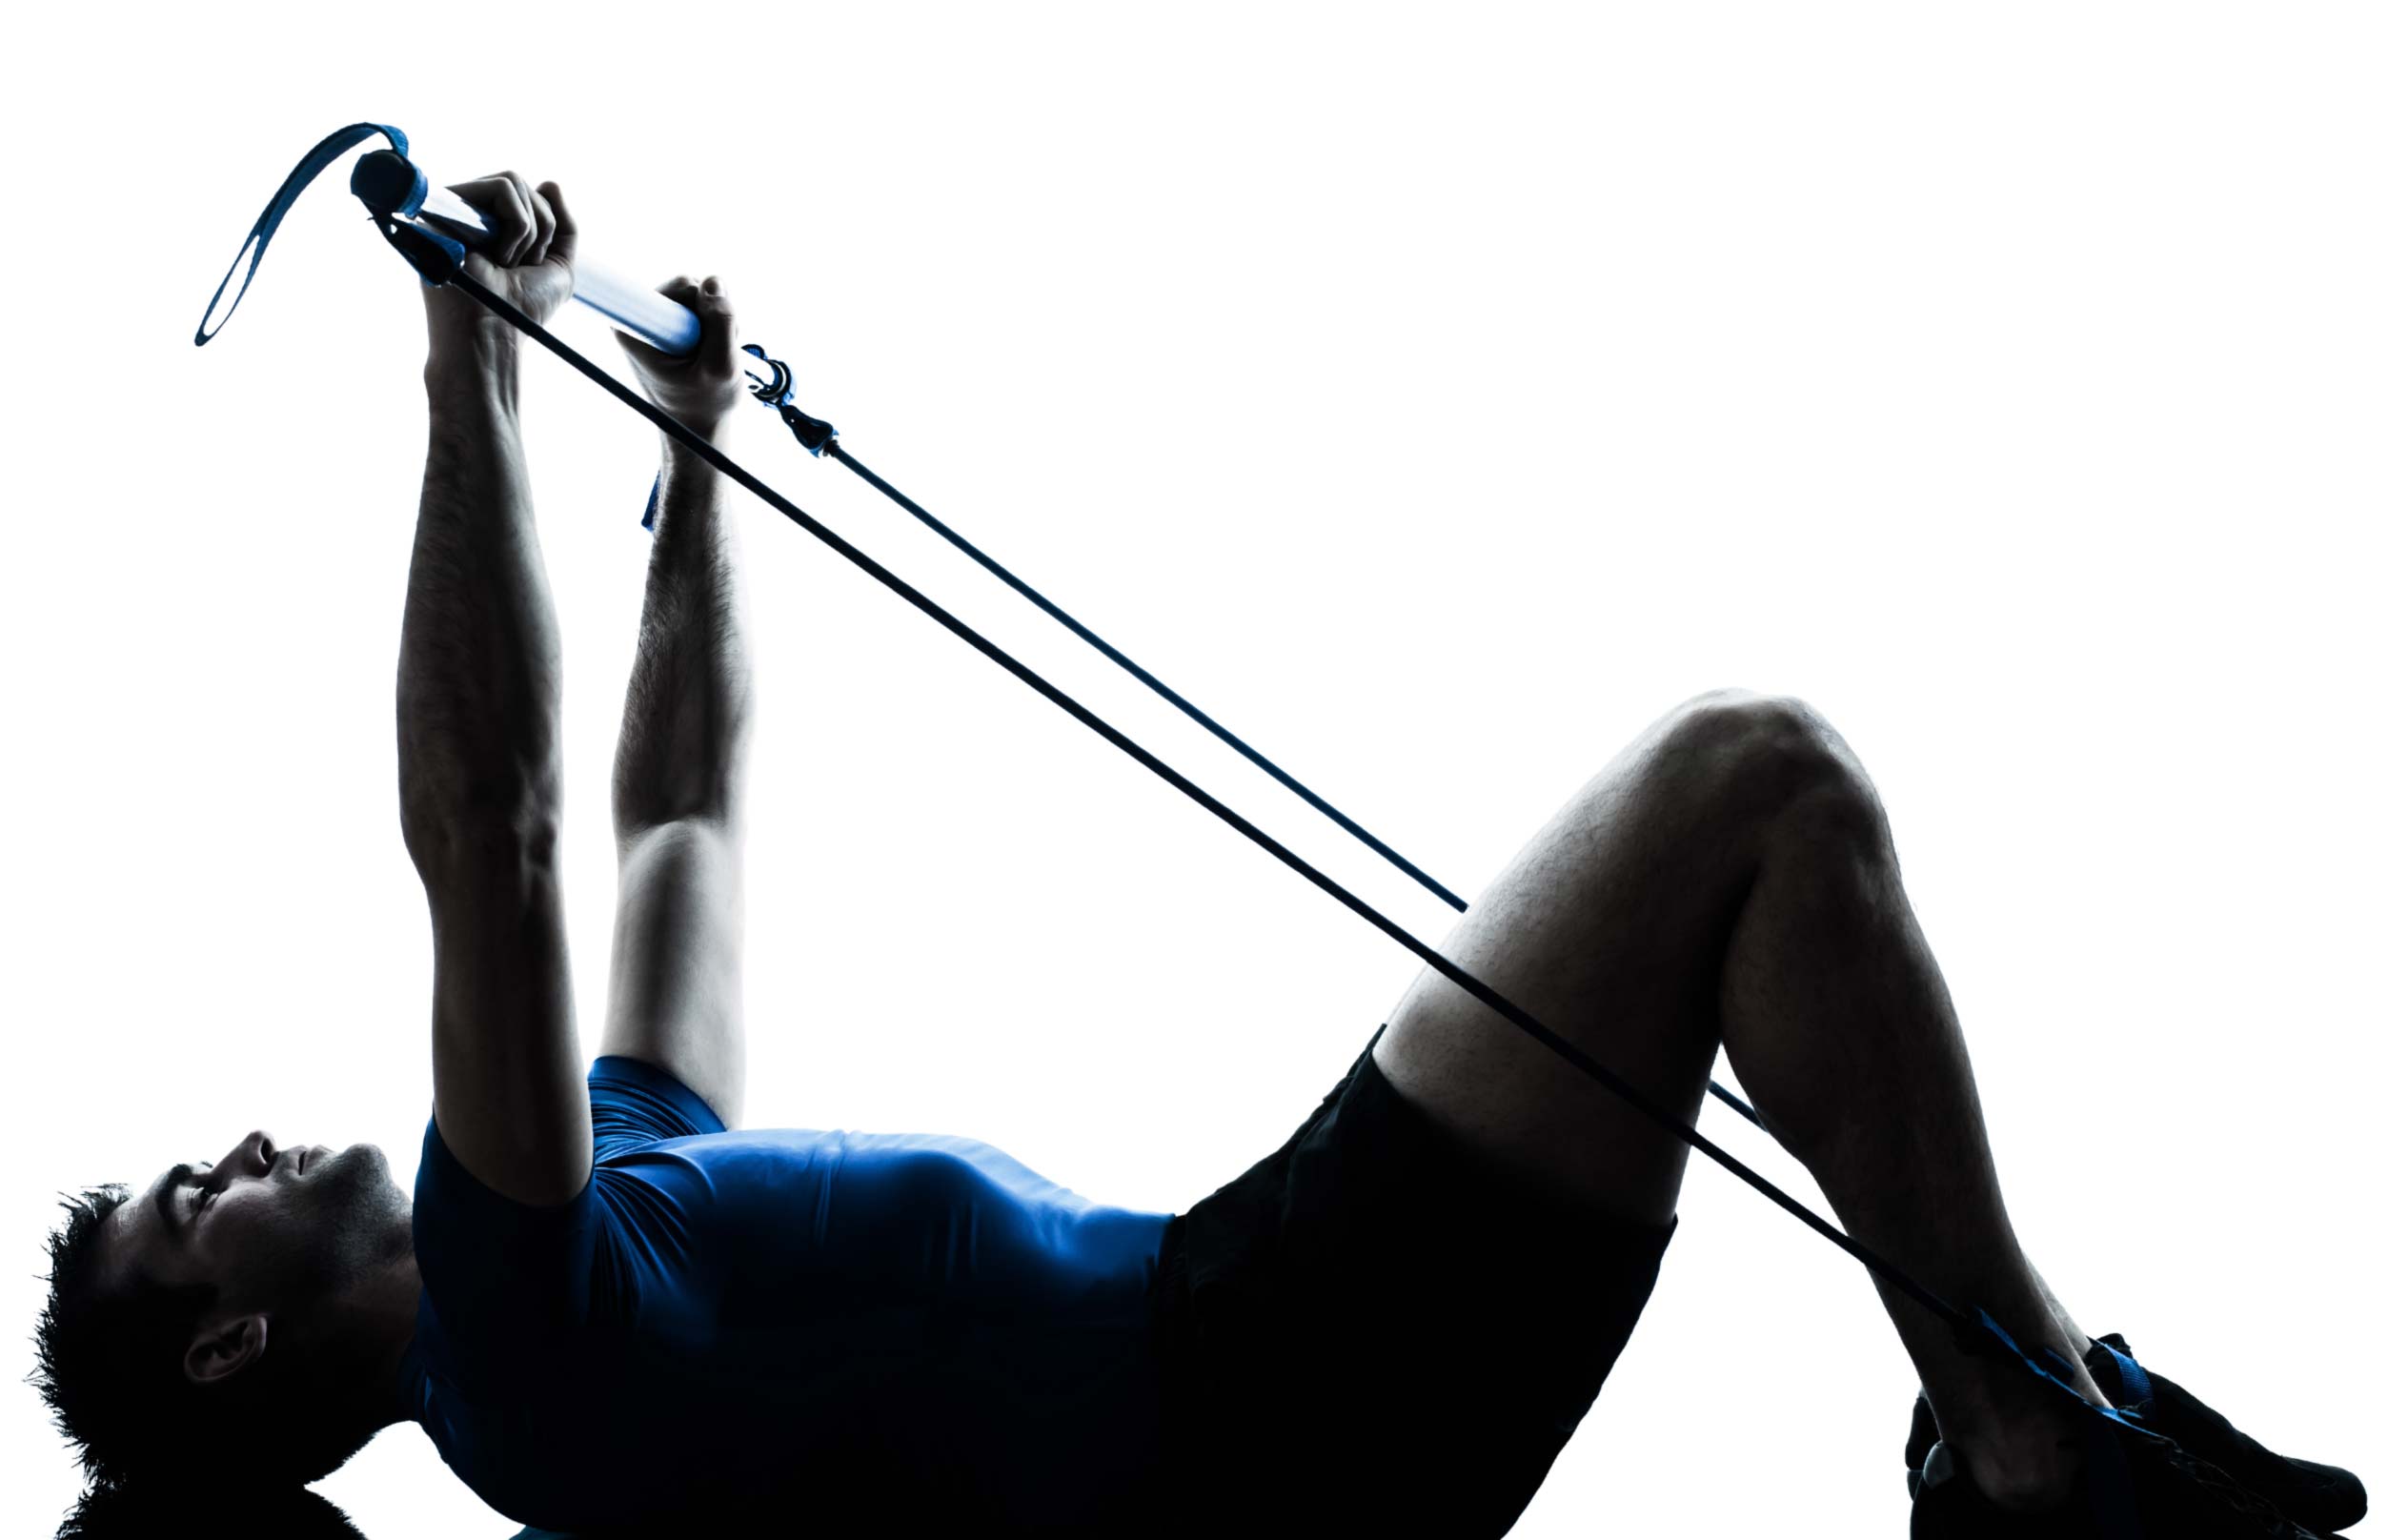 physiotherapy solutions - image of a man exercising